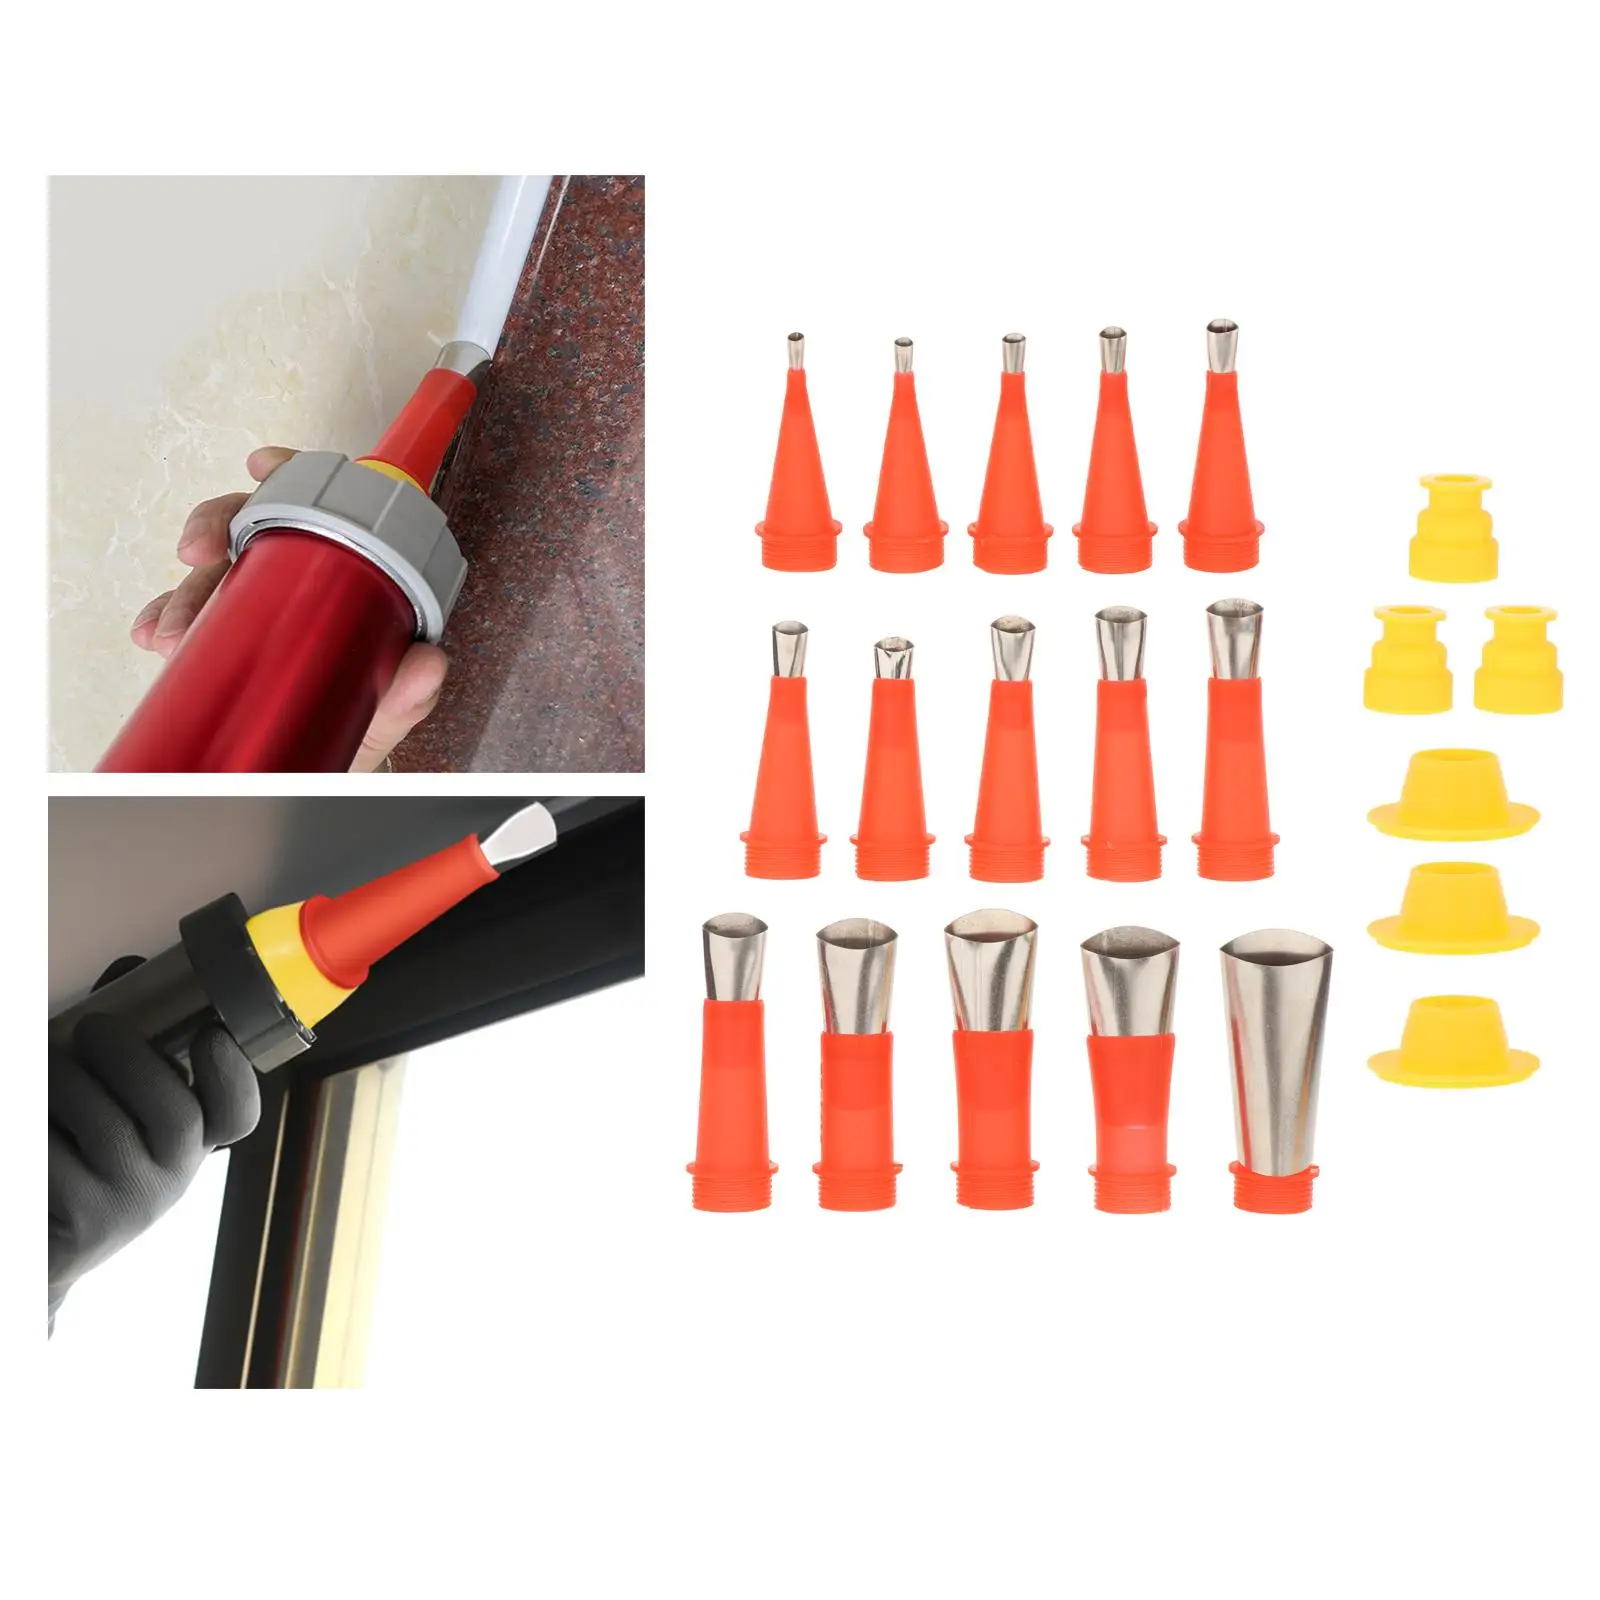 21 Pieces Stainless Steel Caulking Nozzle Tool Set Sealant Caulking Finishing Tool Caulking Finisher Nozzle Kit for Window